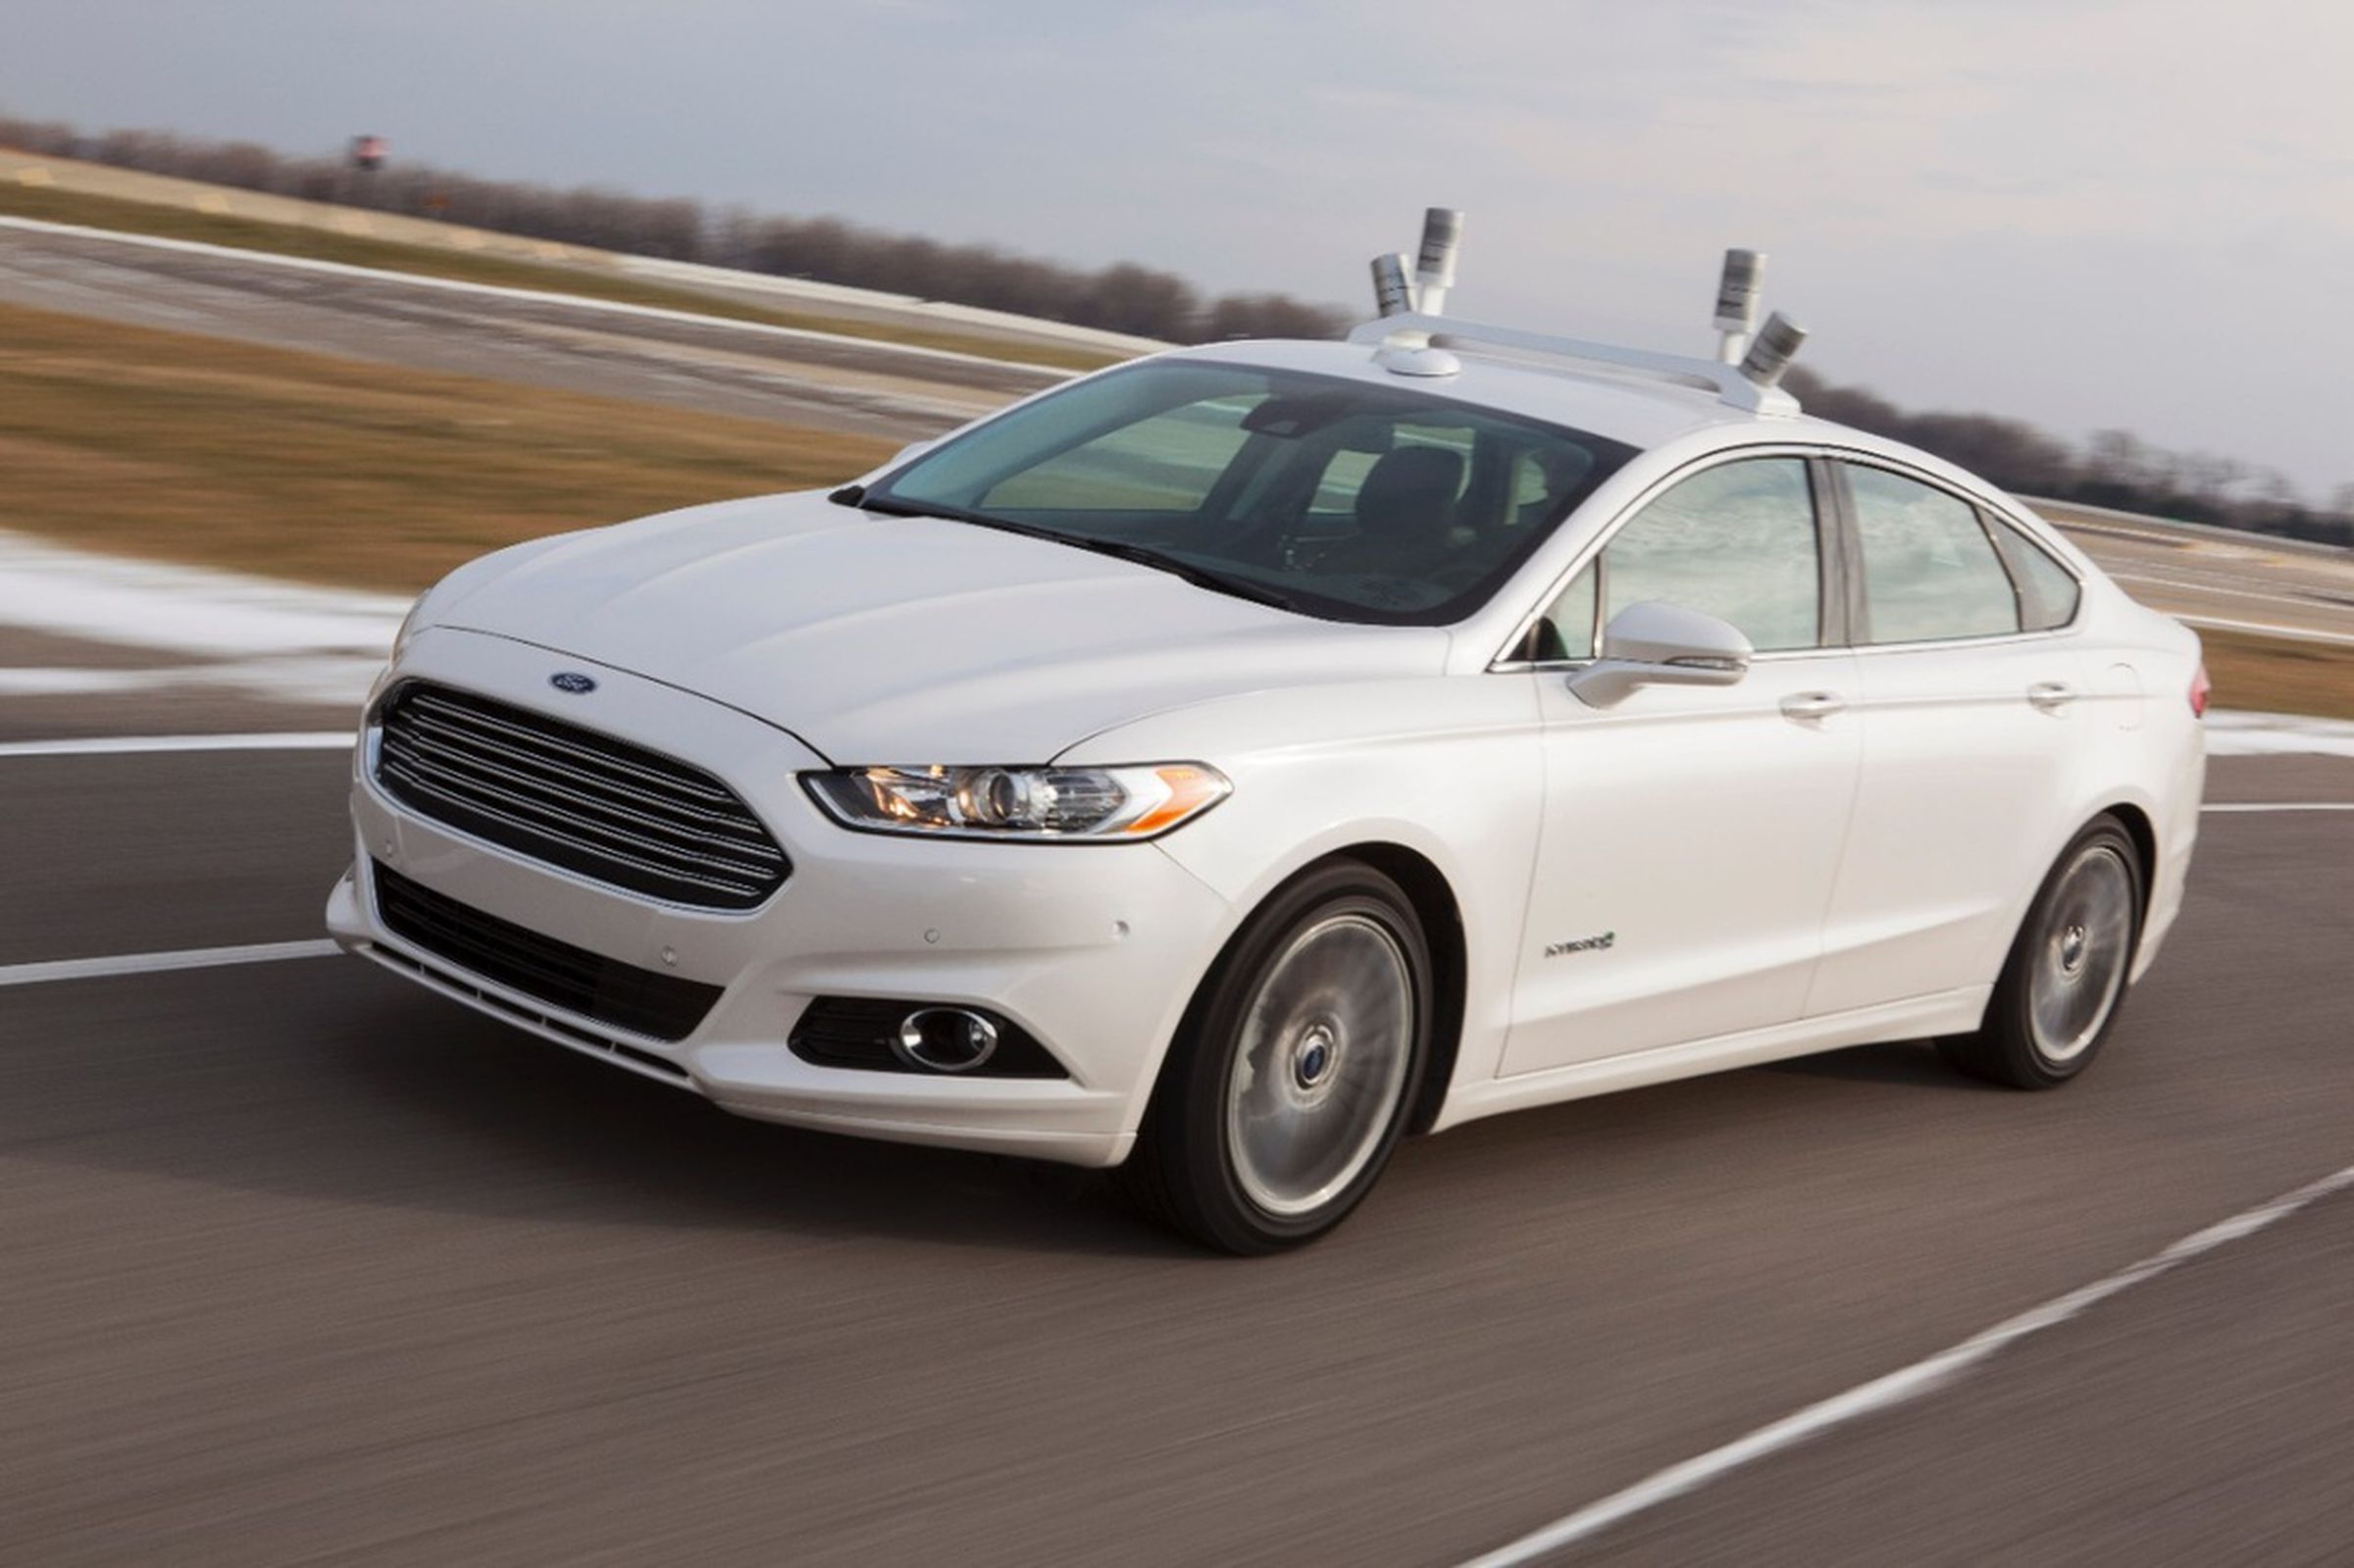 Ford Fusion Hybrid research vehicle press images